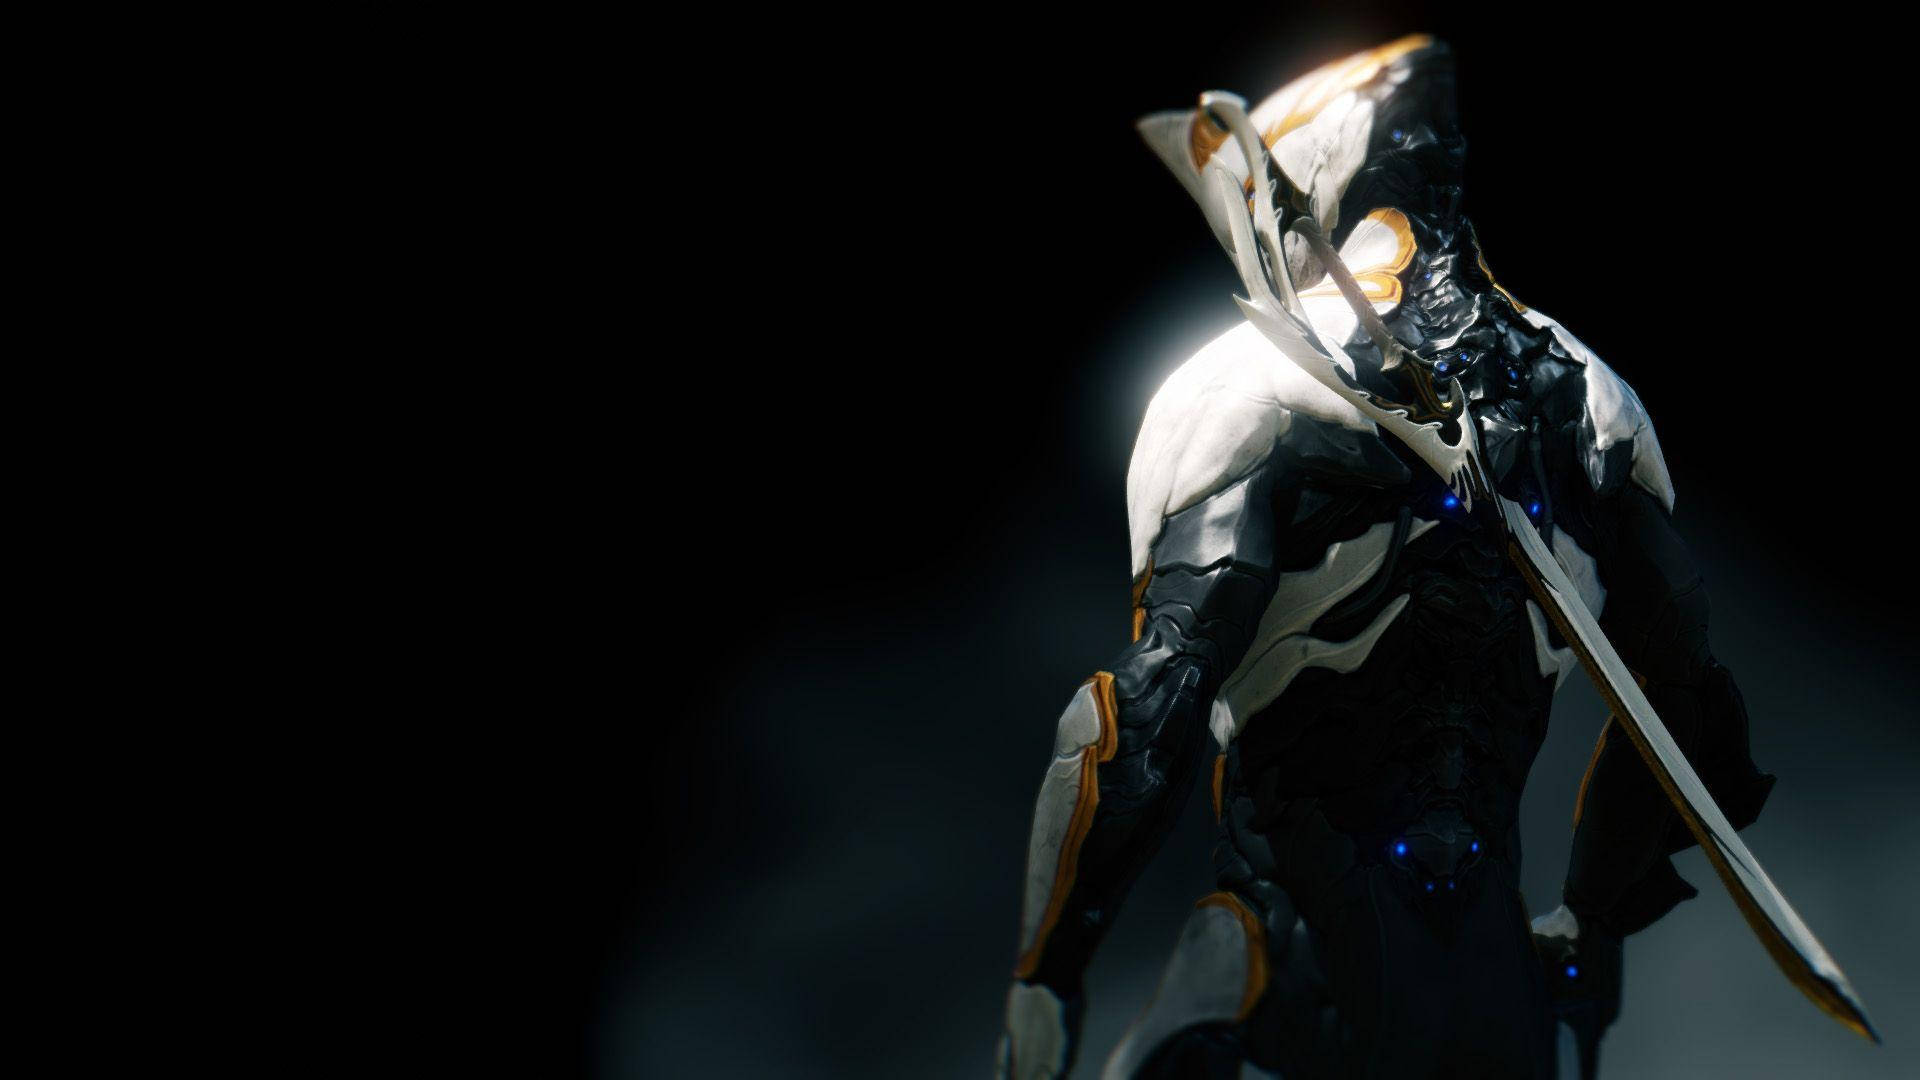 Warframe Tenno soldier with long sword strapped on back wallpaper. 